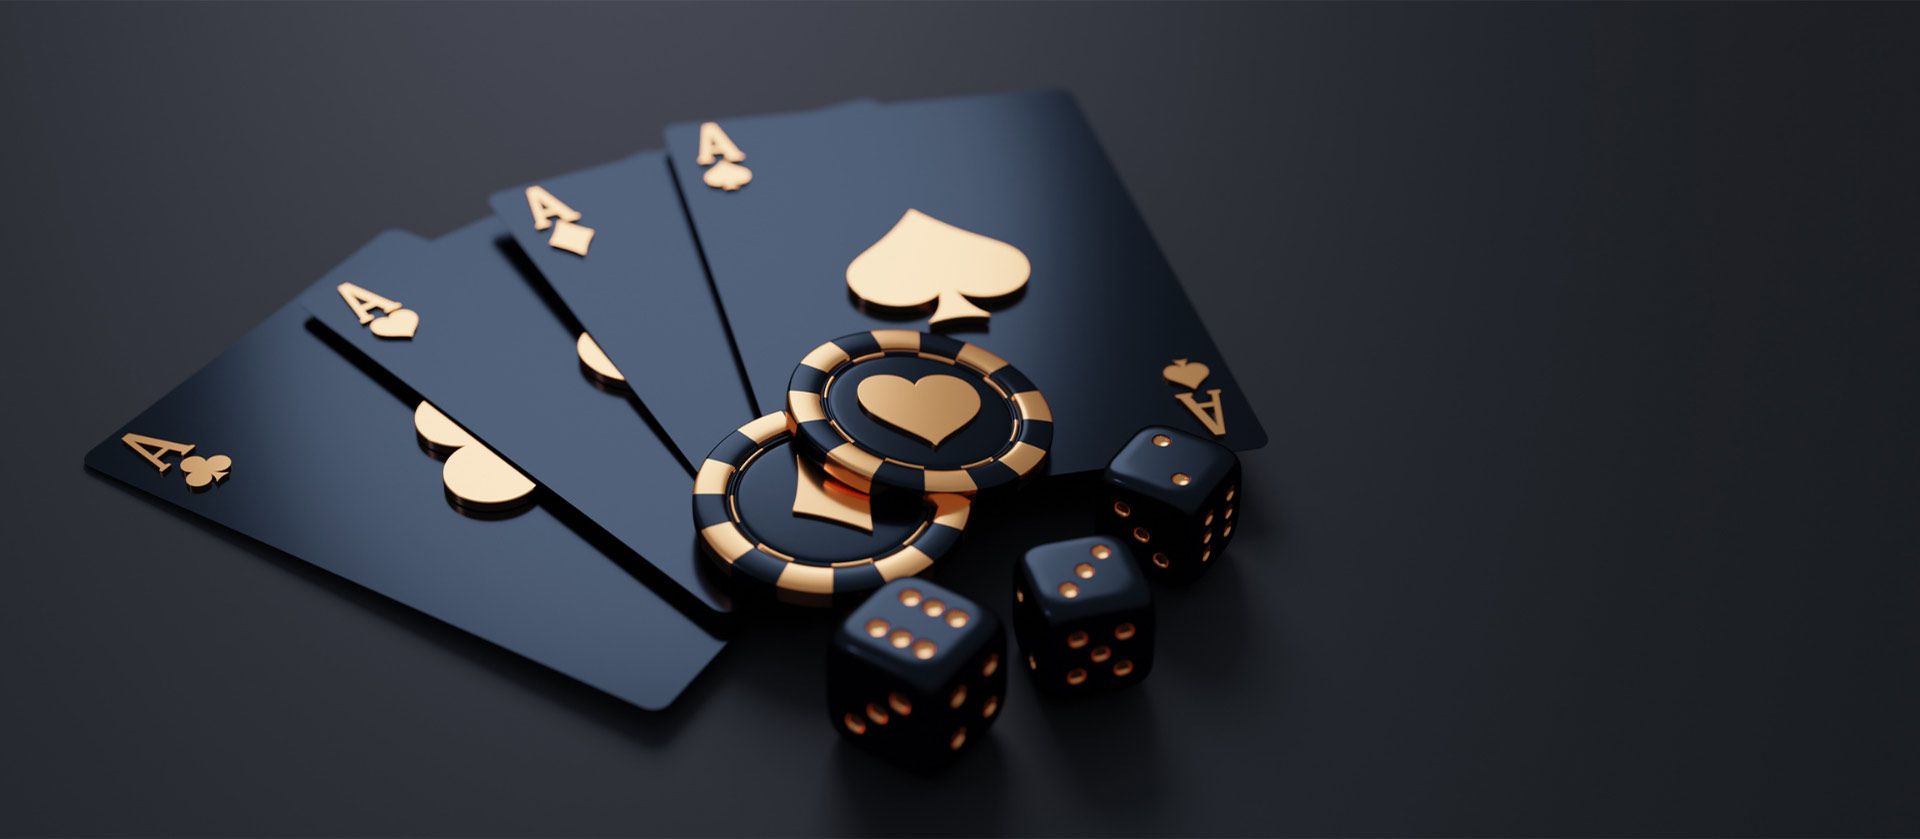 Playing cards and dice on the table.